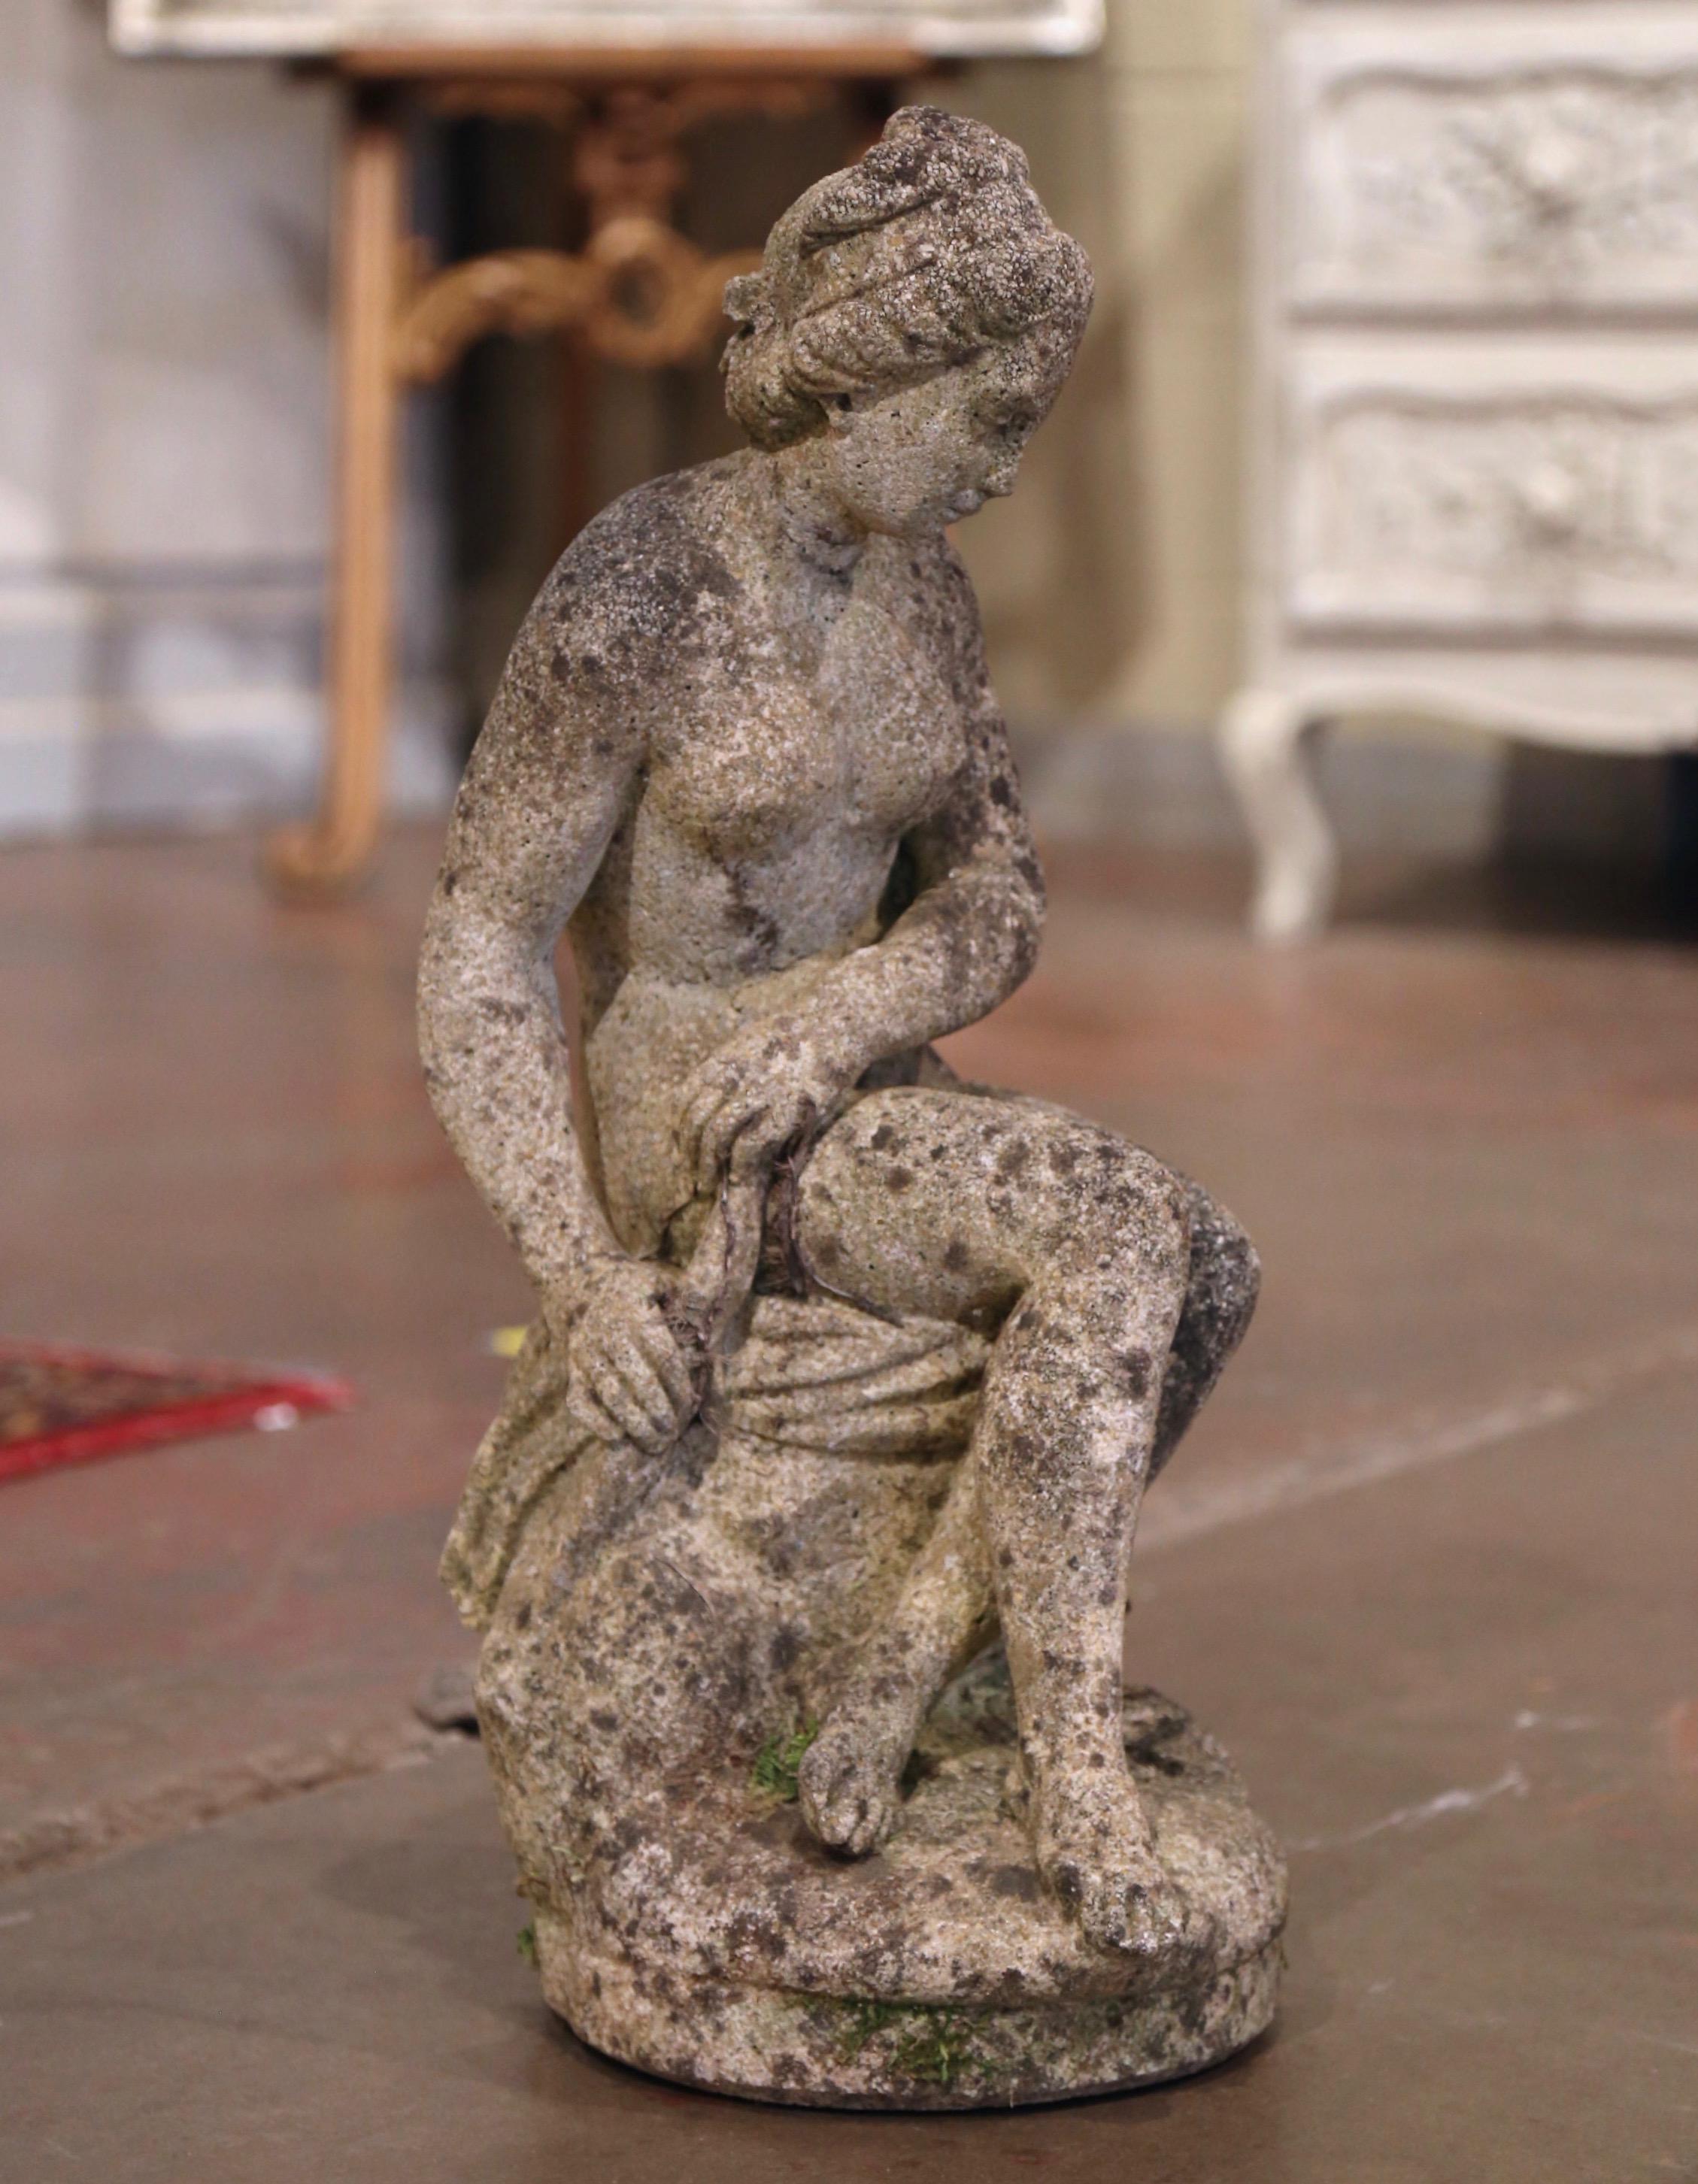 Decorate a garden with this elegant antique outdoor statue; hand carved in France circa 1920, the figure depicts a young goddess sited on a trunk. The statue is in excellent condition with a rich patinated weathered finish. Weight 55